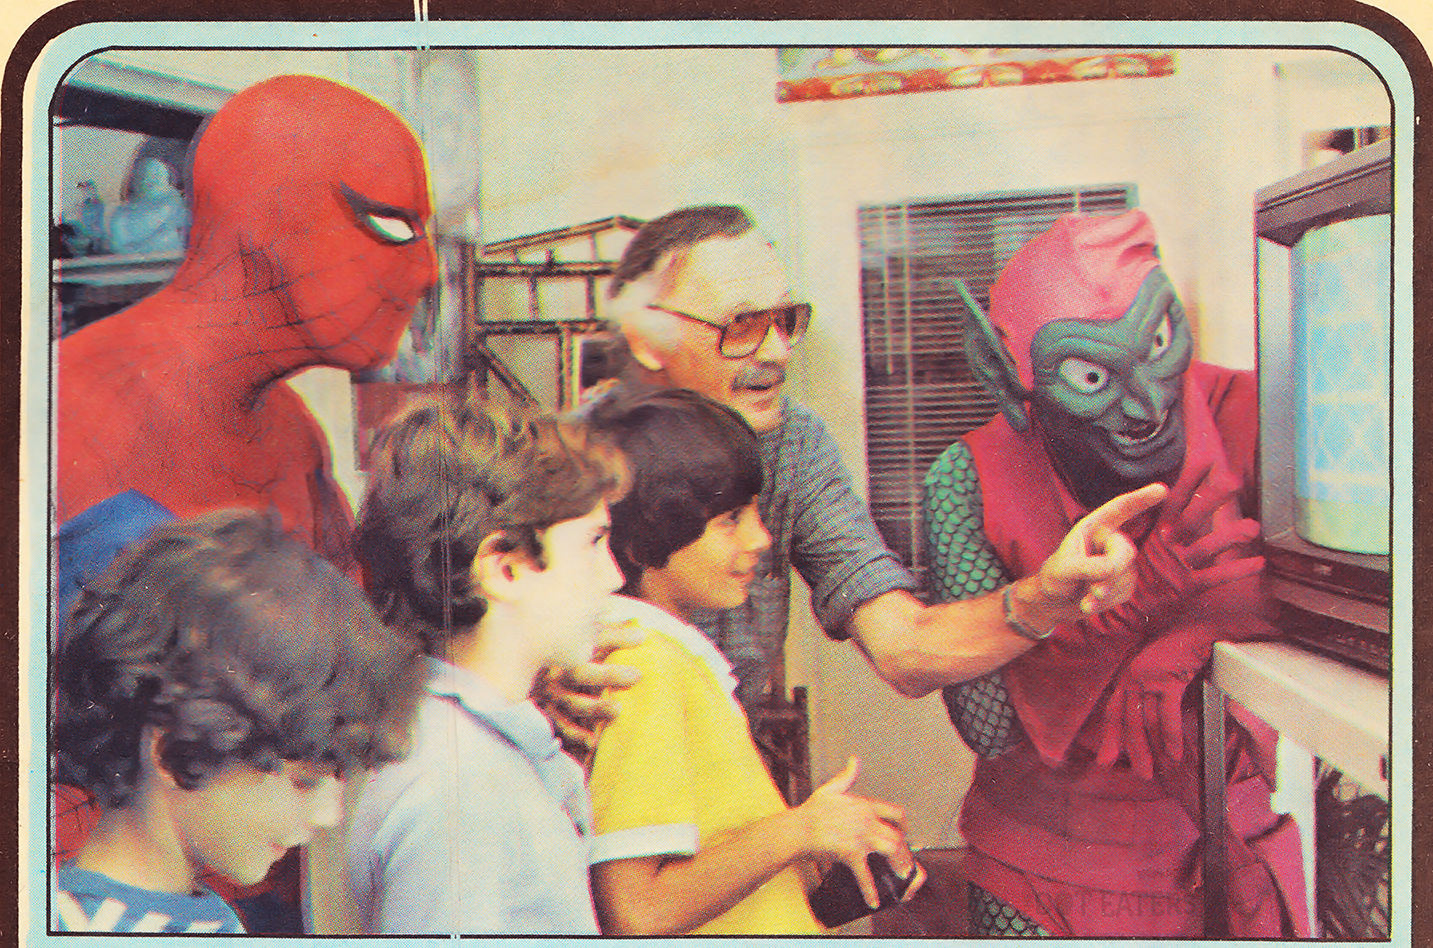 Stan Lee regals a group of kids, along with Spider-Man and Green Goblin